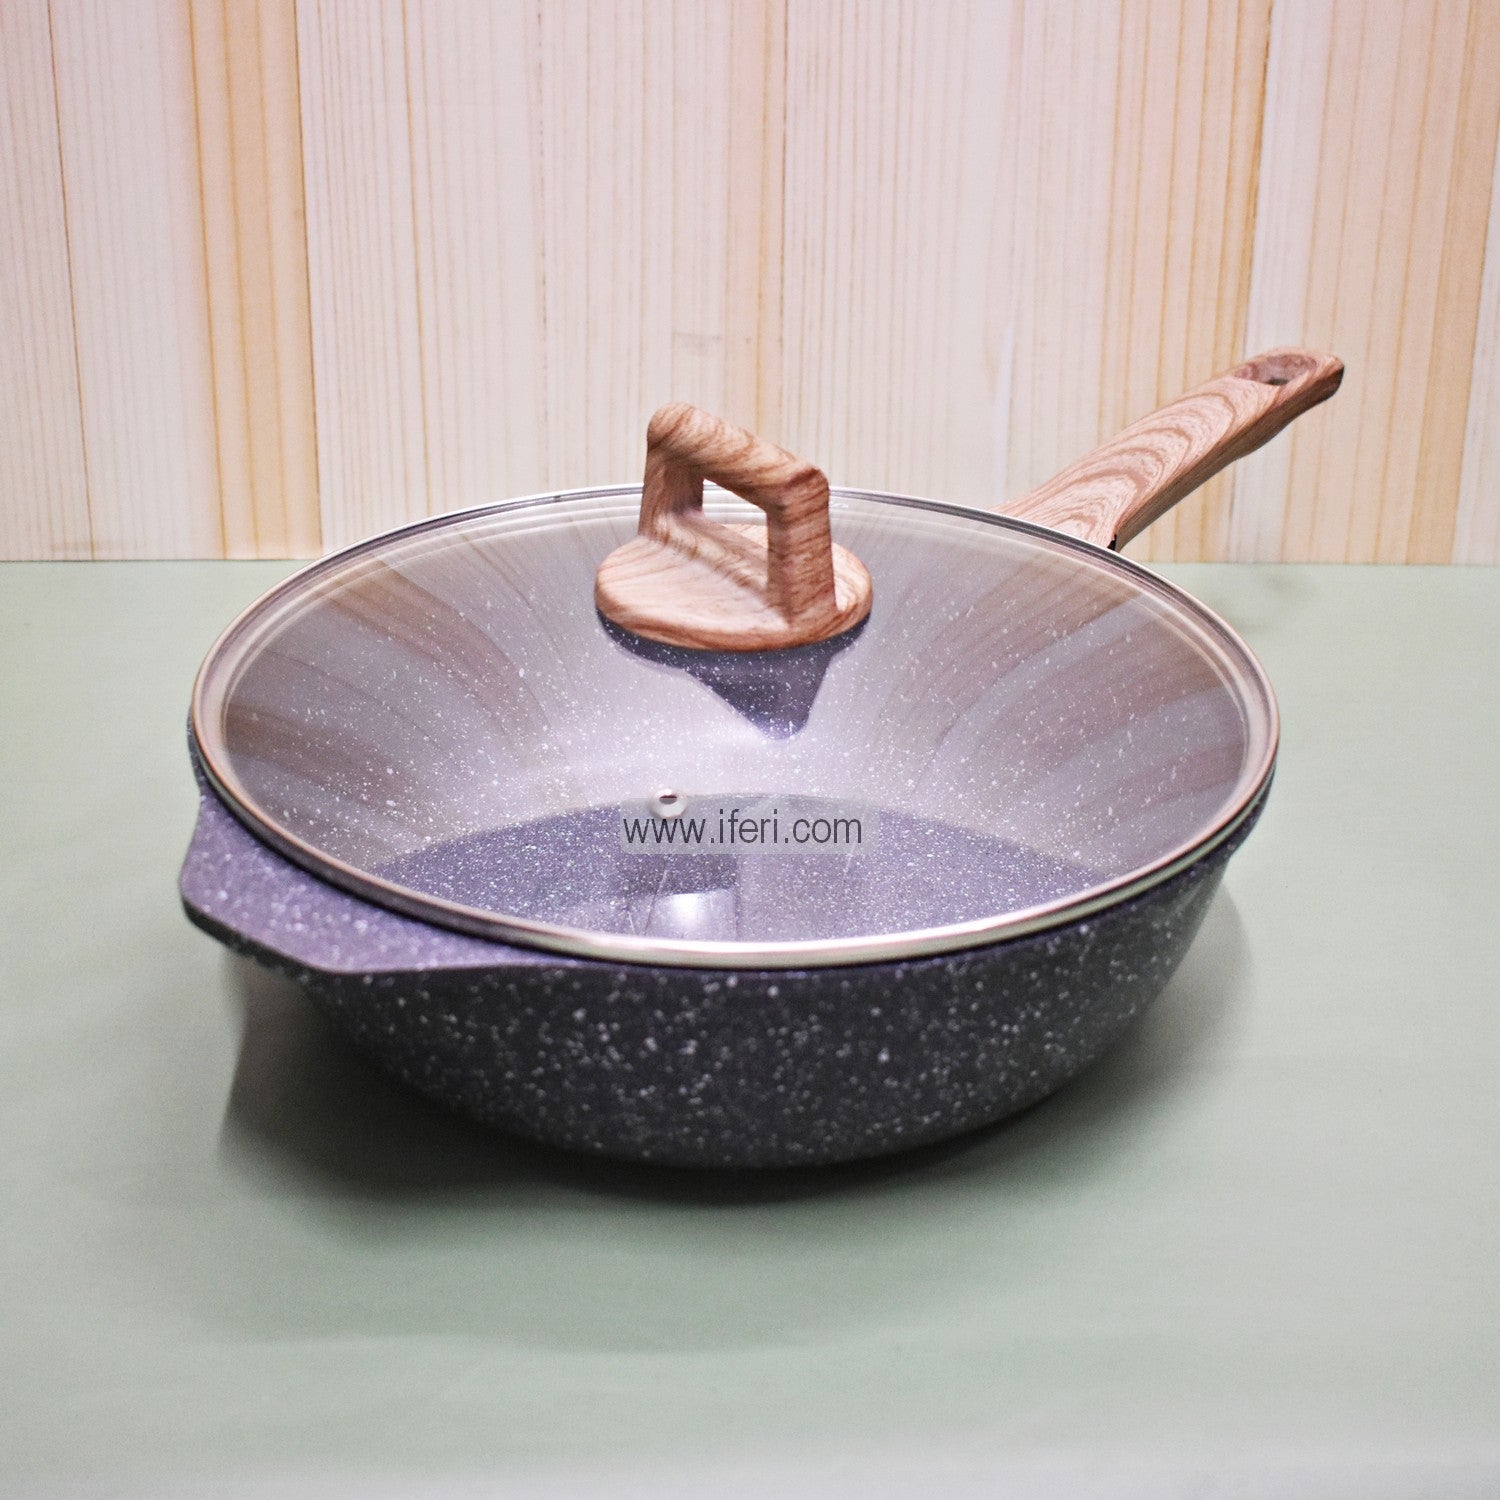 32cm Uakeen Non-Stick Granite Coated Wok Pan With Lid RH1854